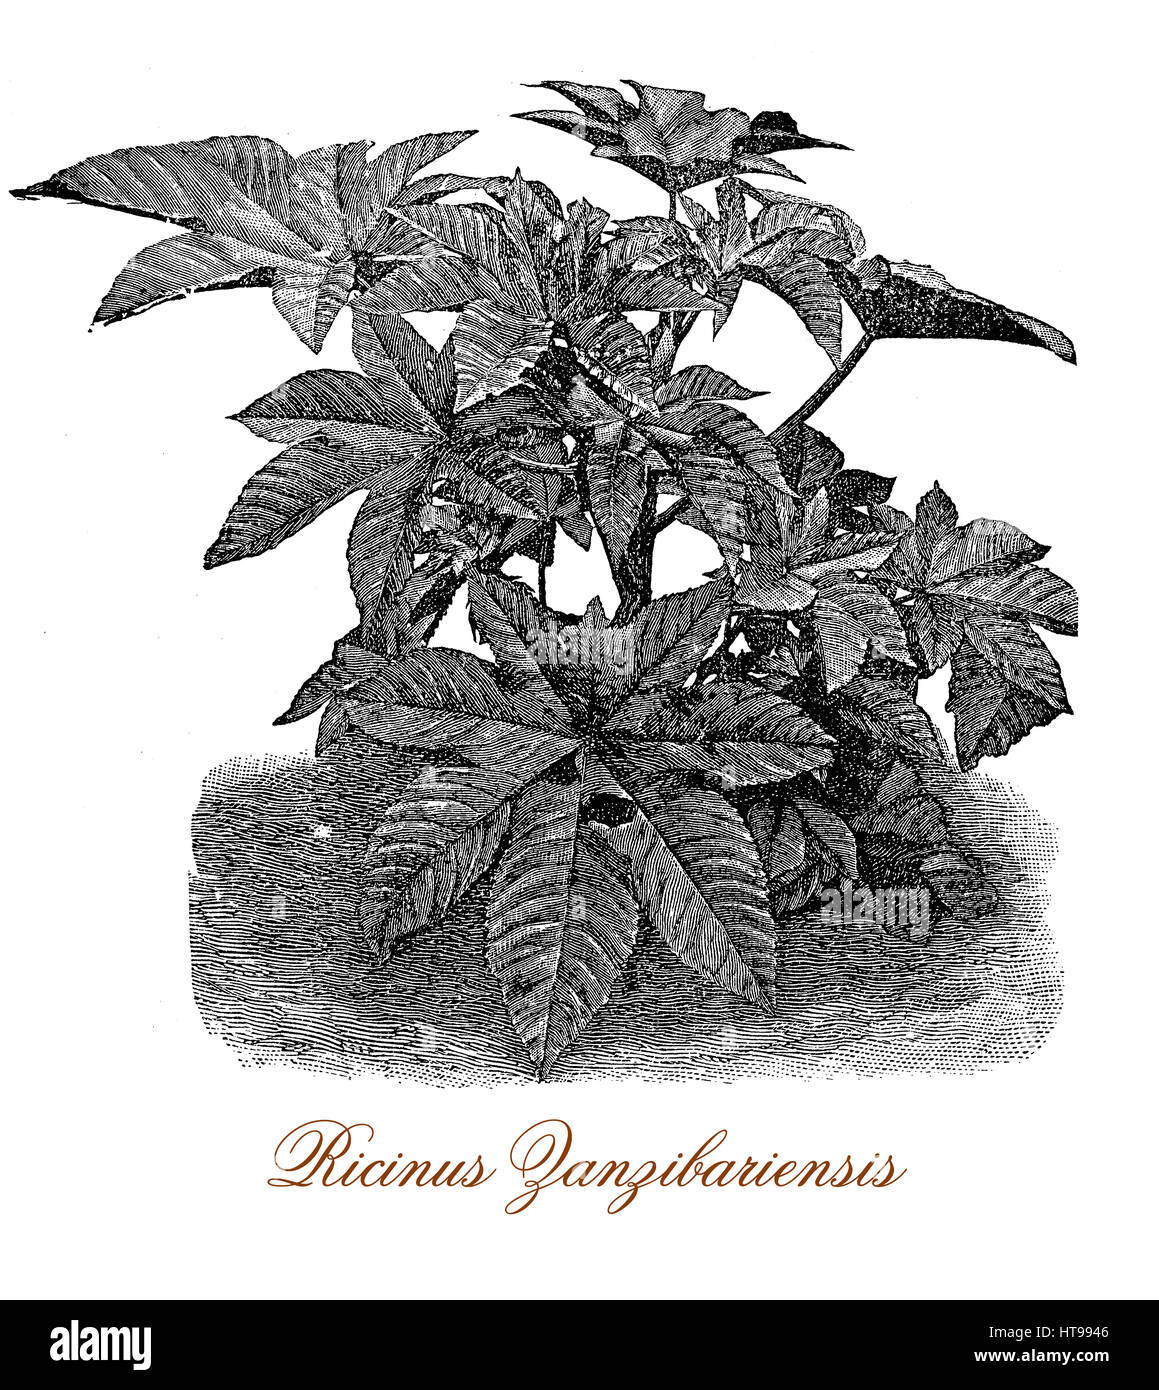 Vintage print describing Ricinus flowering plant known also as castor-oil-plant, from the seeds is produced castor oil used as motor lubricant and in medicine and ricin, a water-soluble toxin. Stock Photo